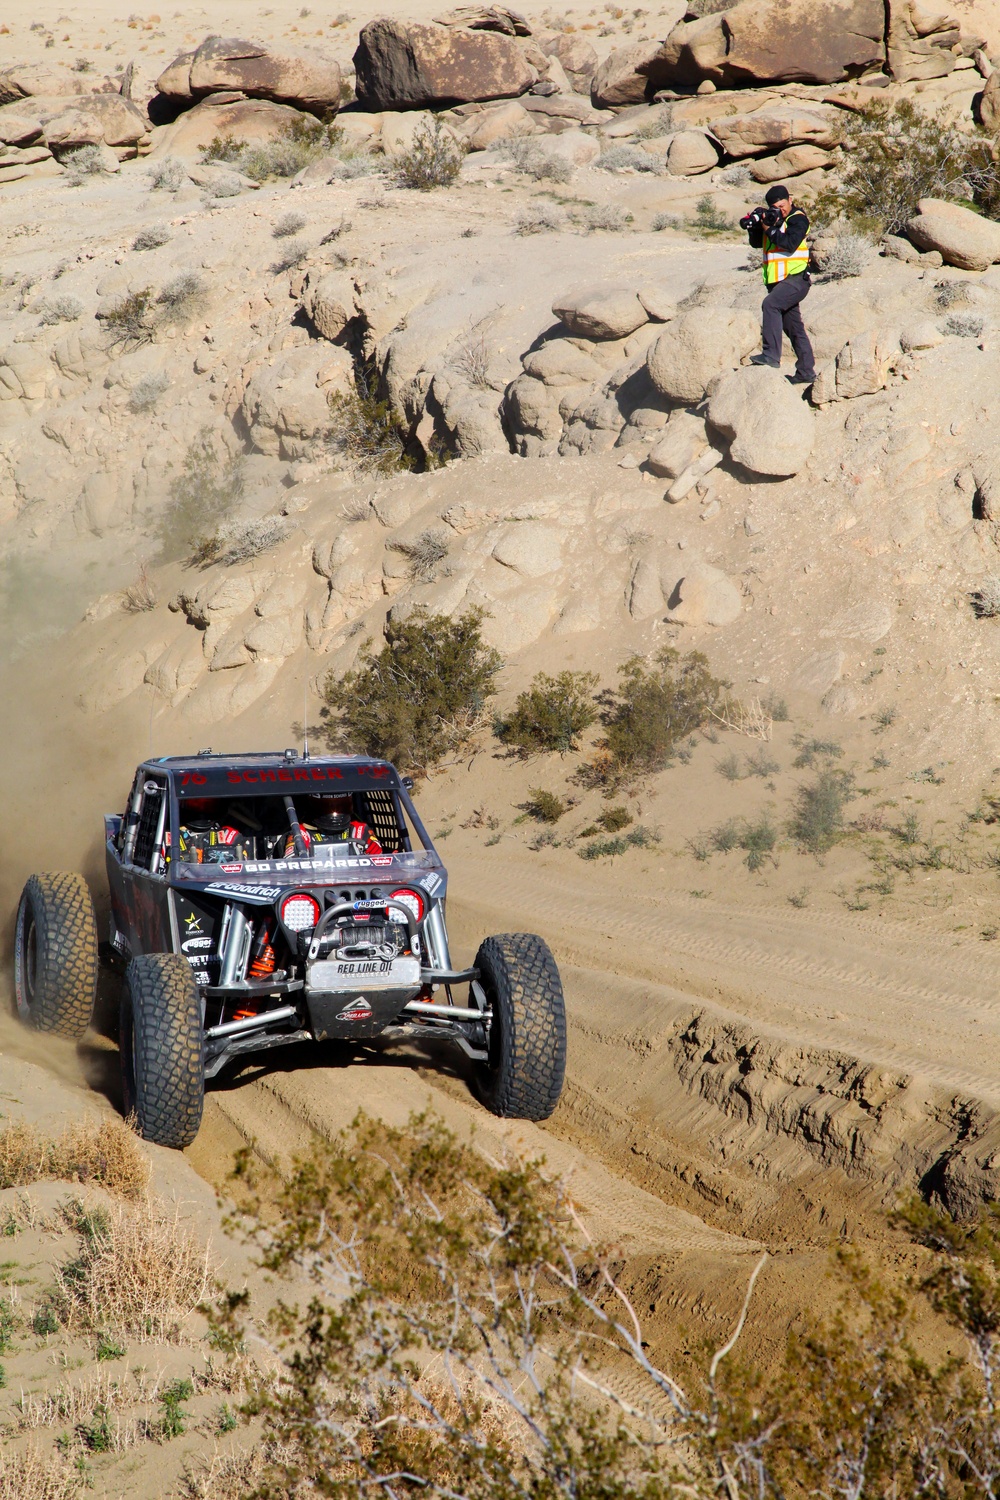 Multi-agency coordination, planning keeps 2019 King of the Hammers on track for safety